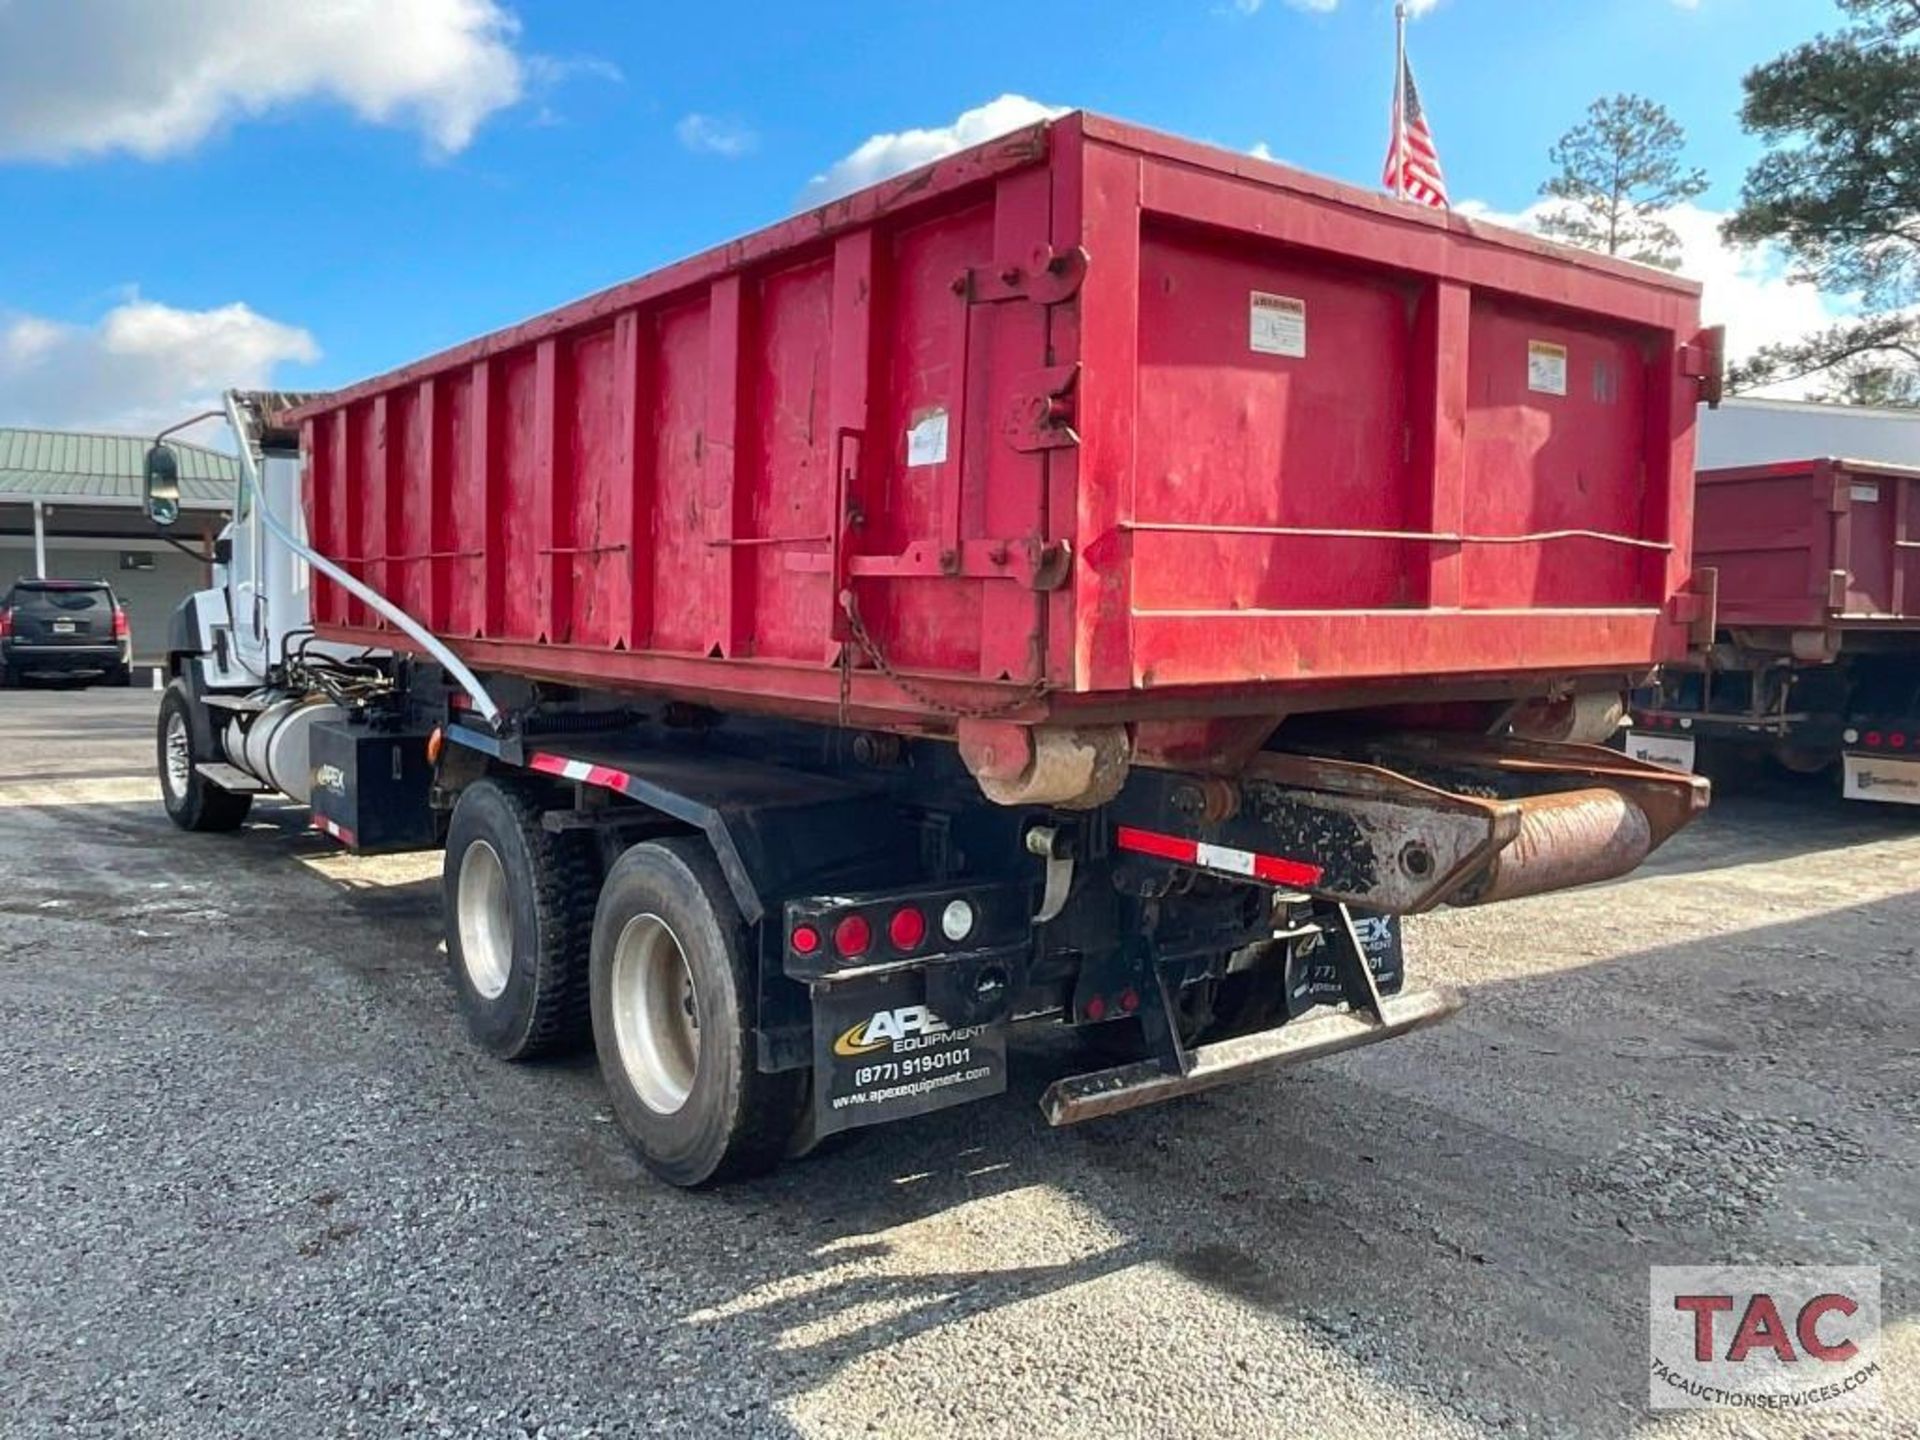 2012 CAT CT660S Roll-Off Truck W/ 20yd Dumpster - Image 9 of 148